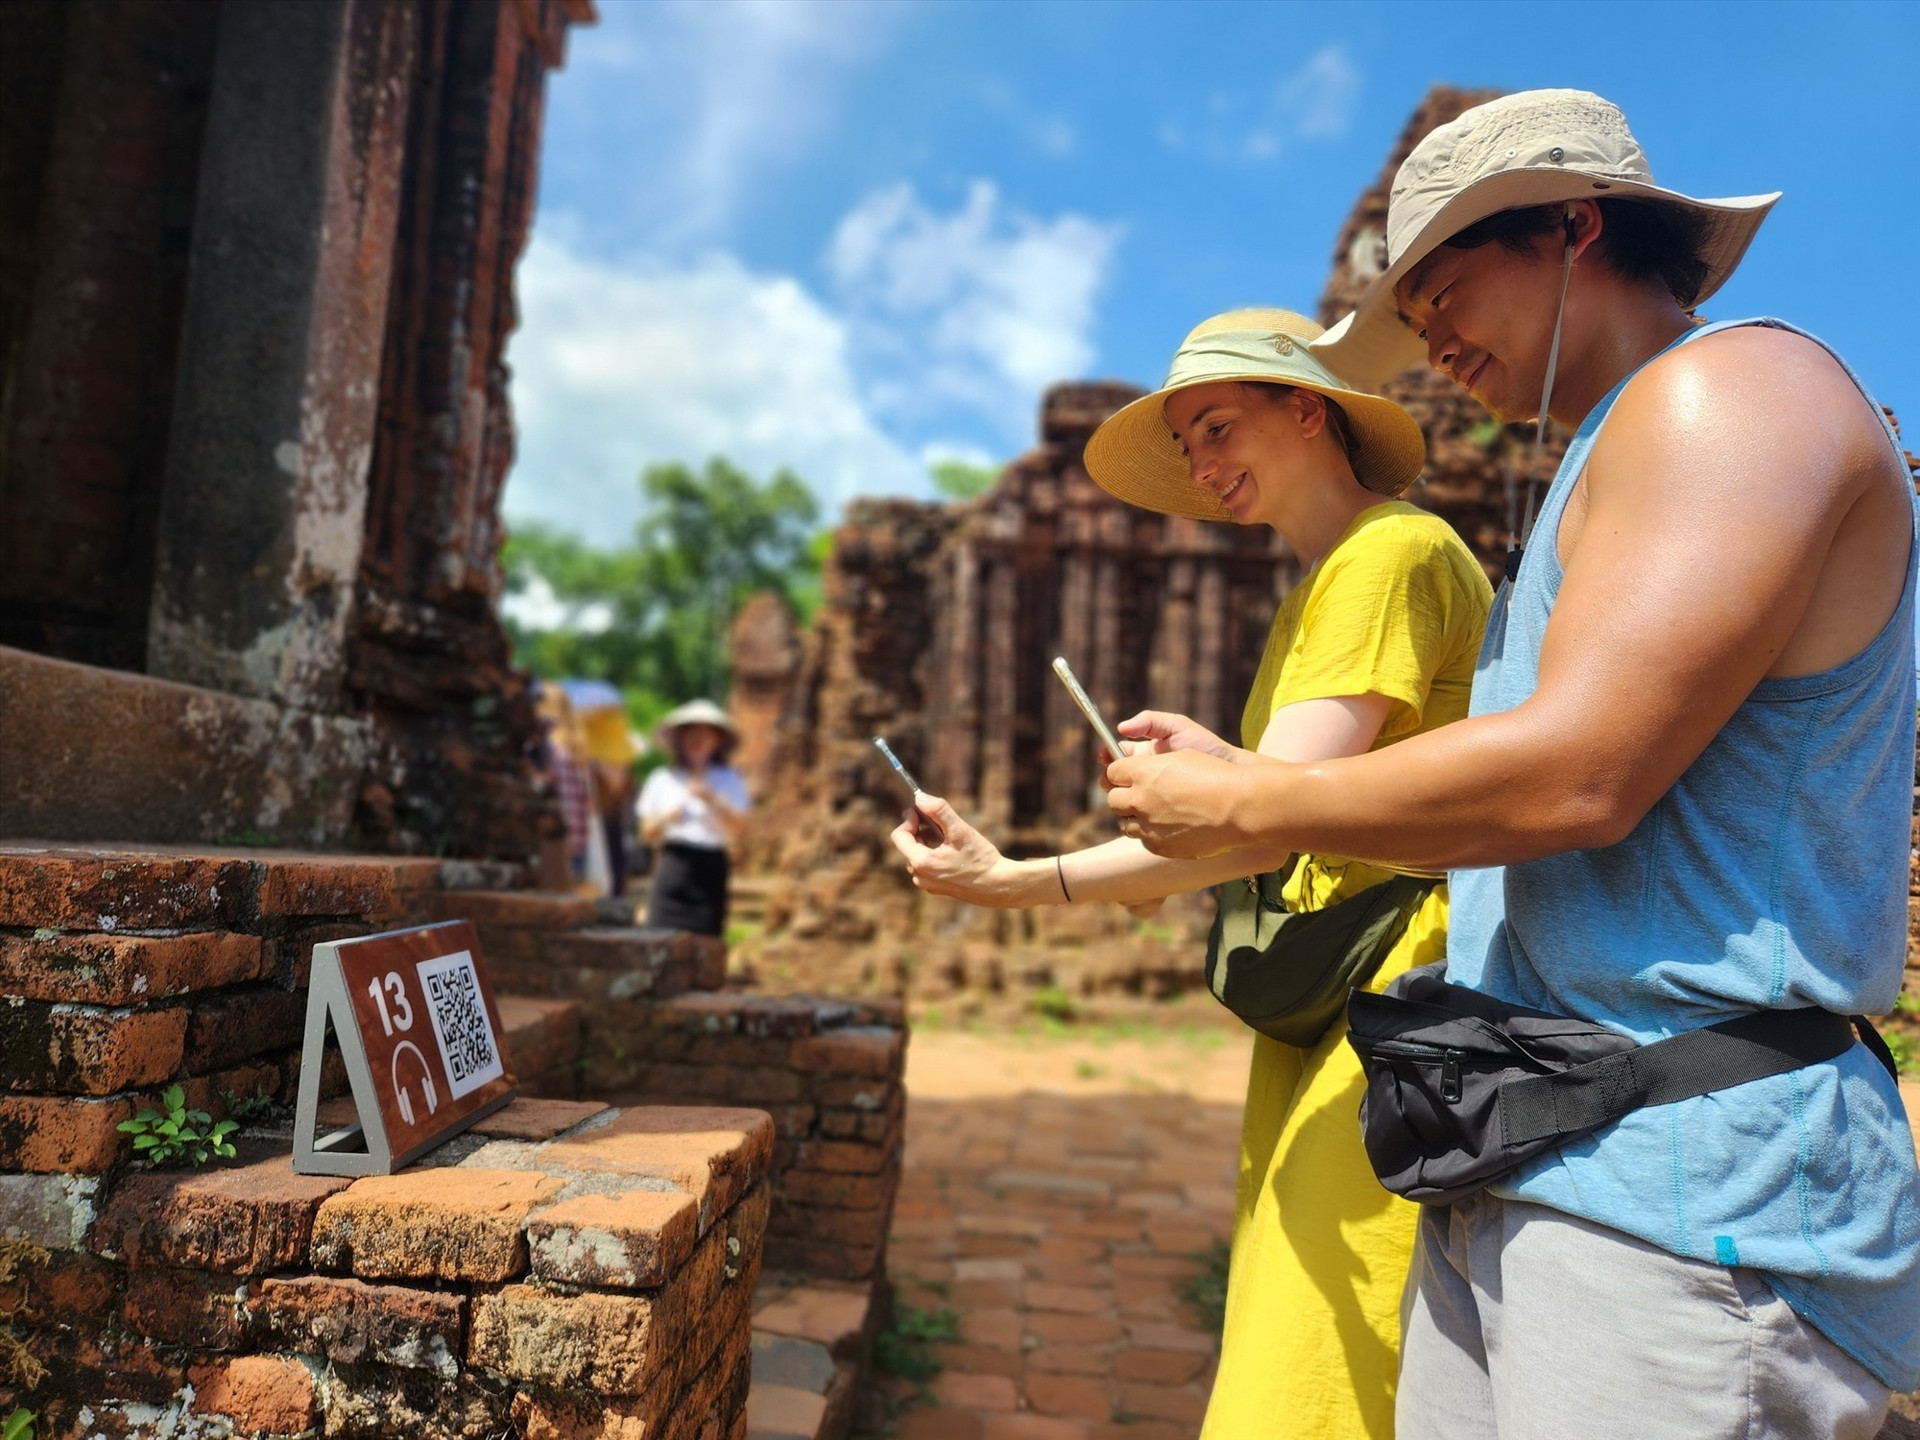 Foreigners getting information about My Son Sanctuary via QR check